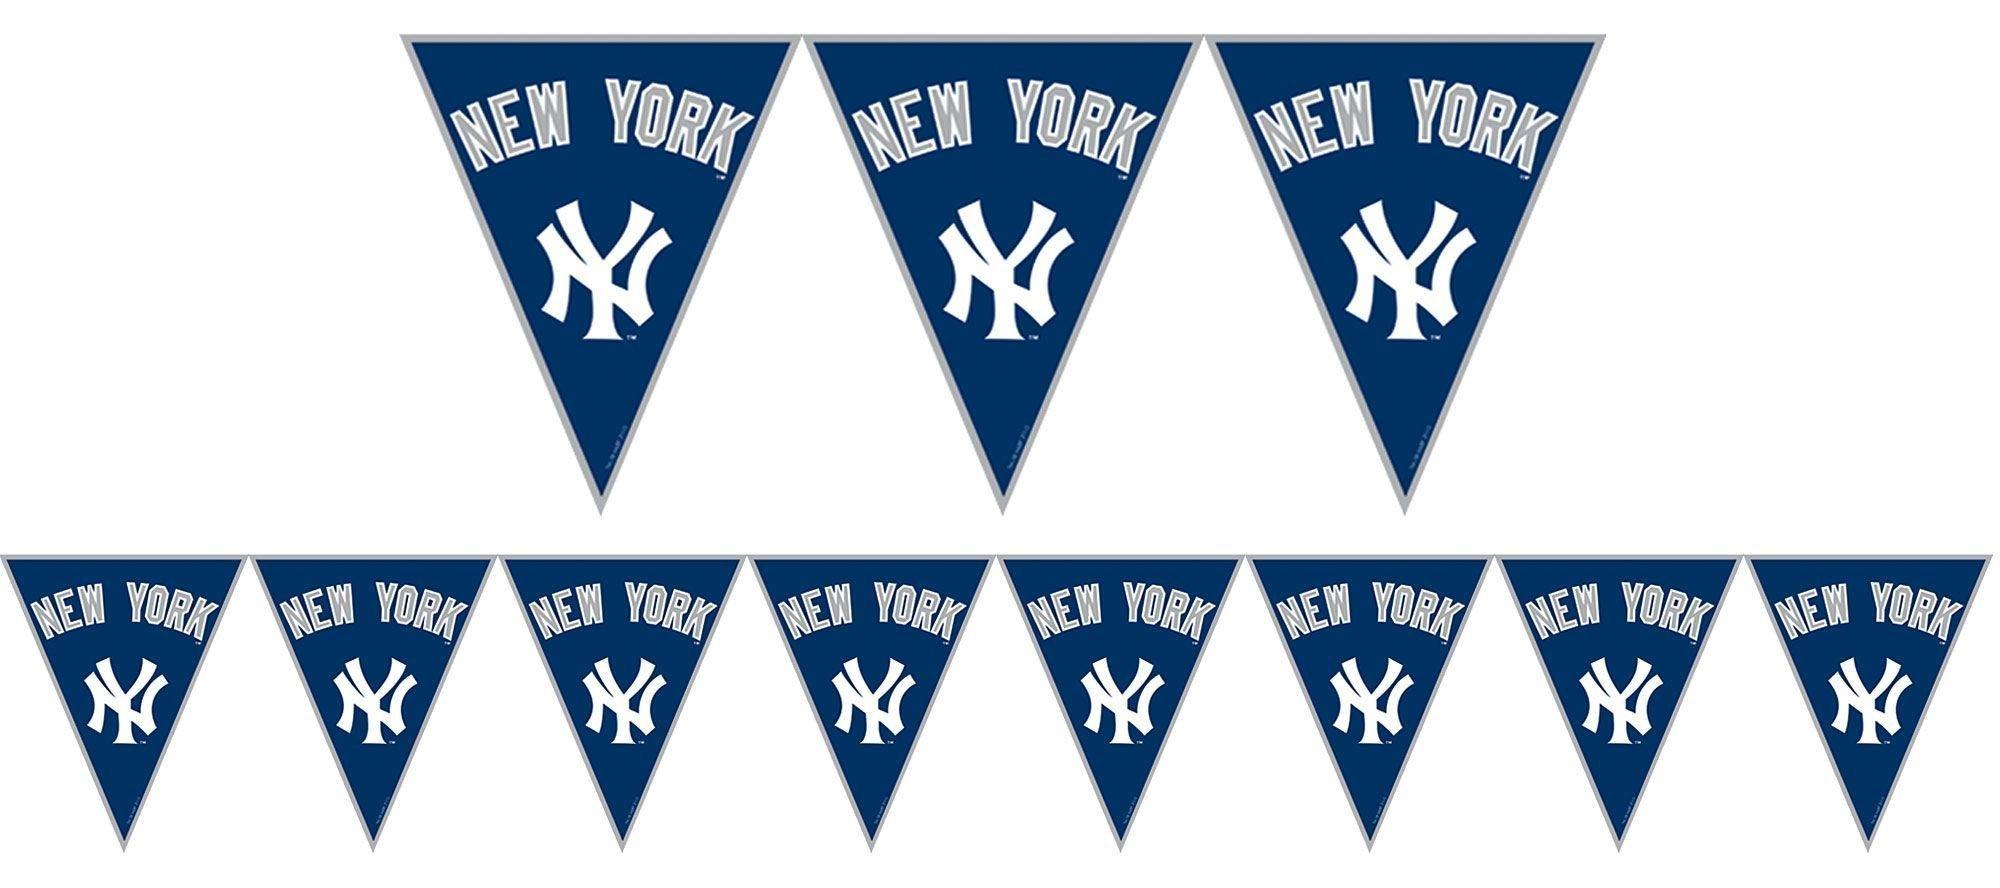  Amscan New York Yankees Party Napkins - 6 1/2' x 6 1/2', White,  Pack of 36 : Toys & Games